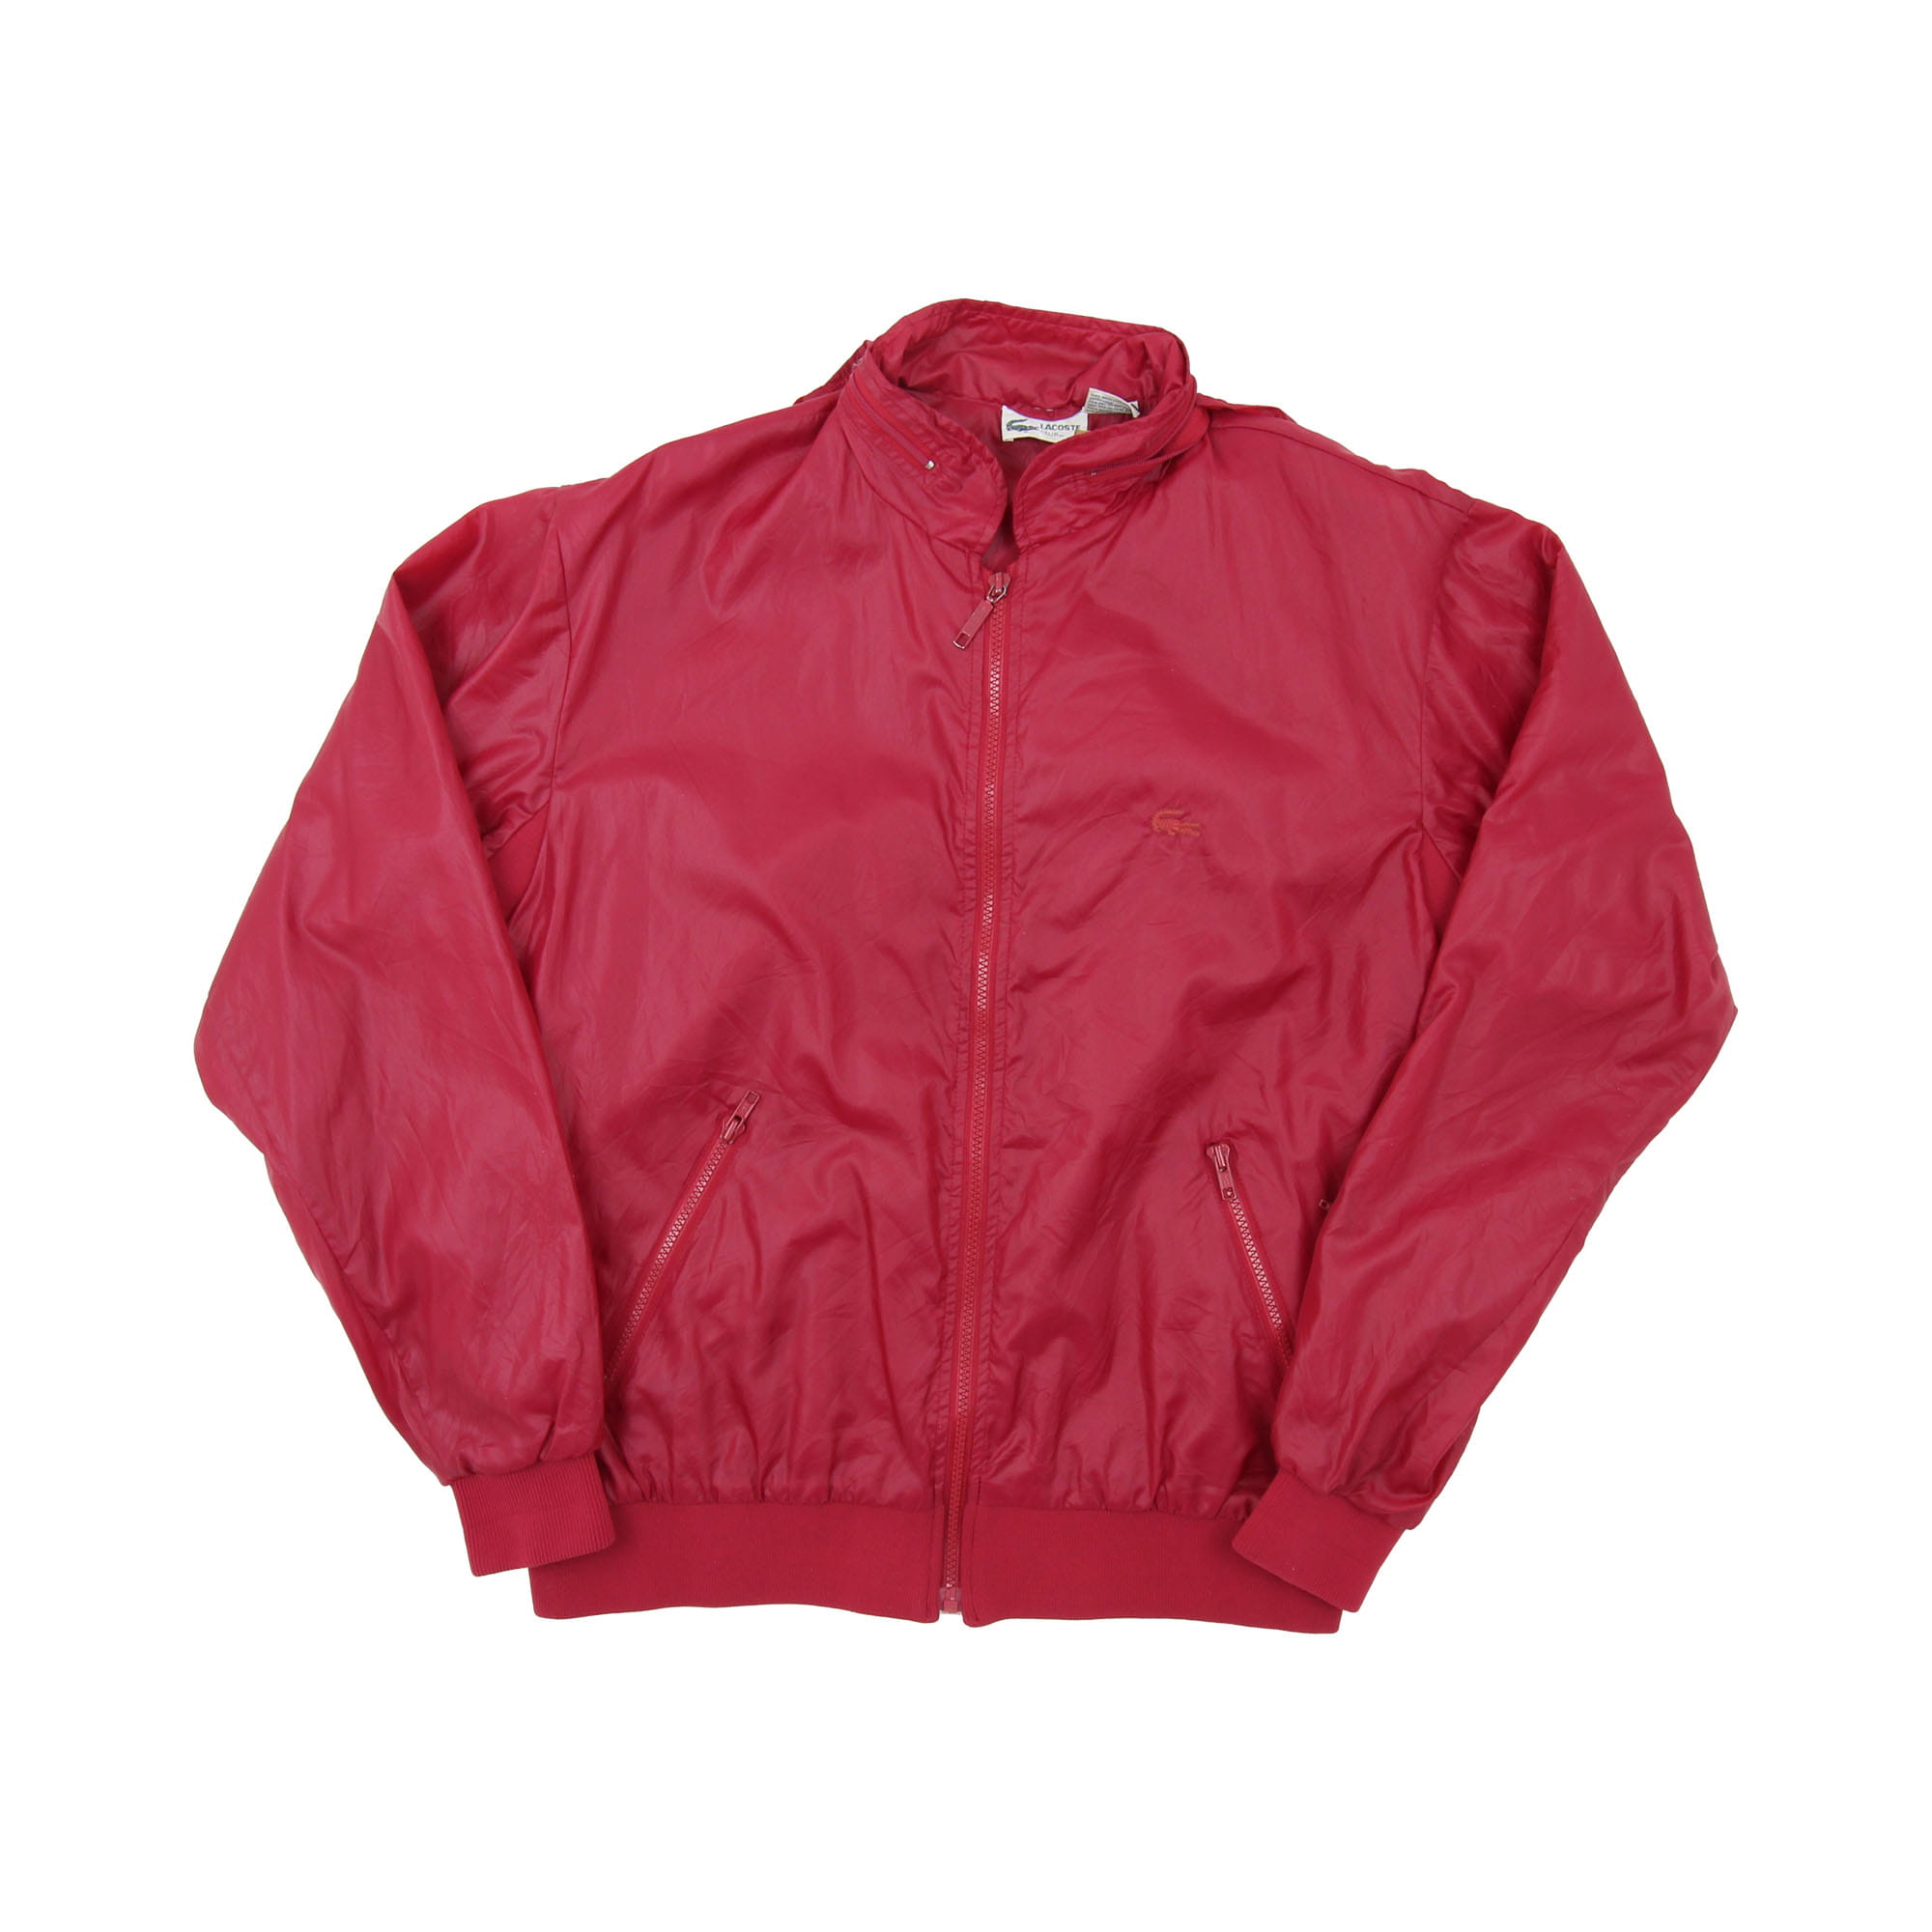 Lacoste Thin Jacket Red -  M